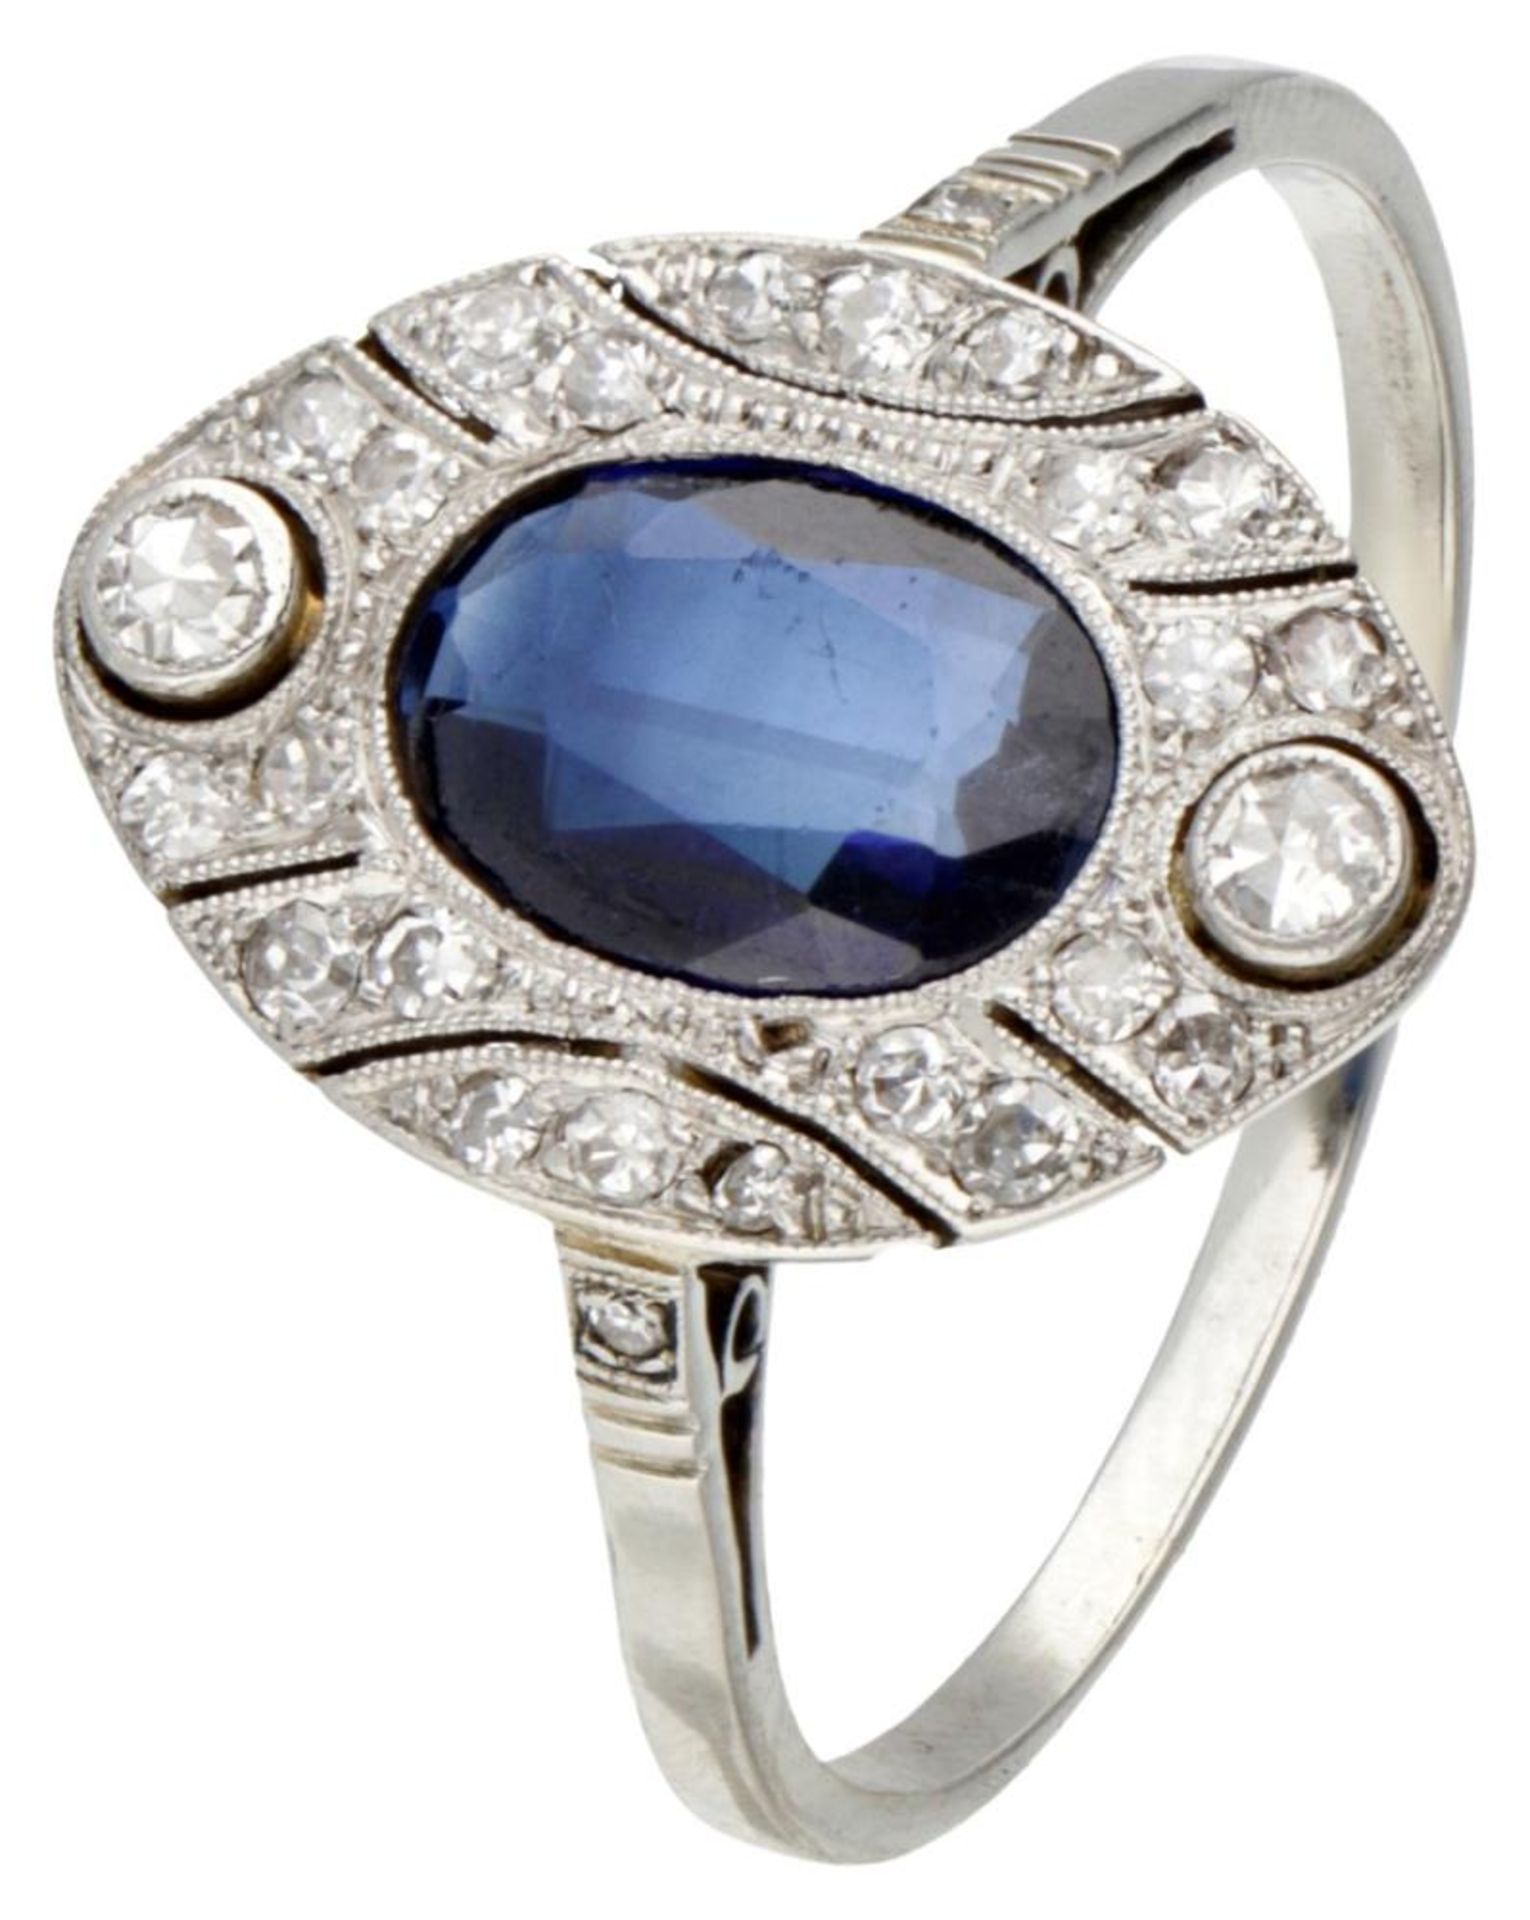 14K. White gold Art Deco ring set with approx. 0.29 ct. diamond and synthetic sapphire.